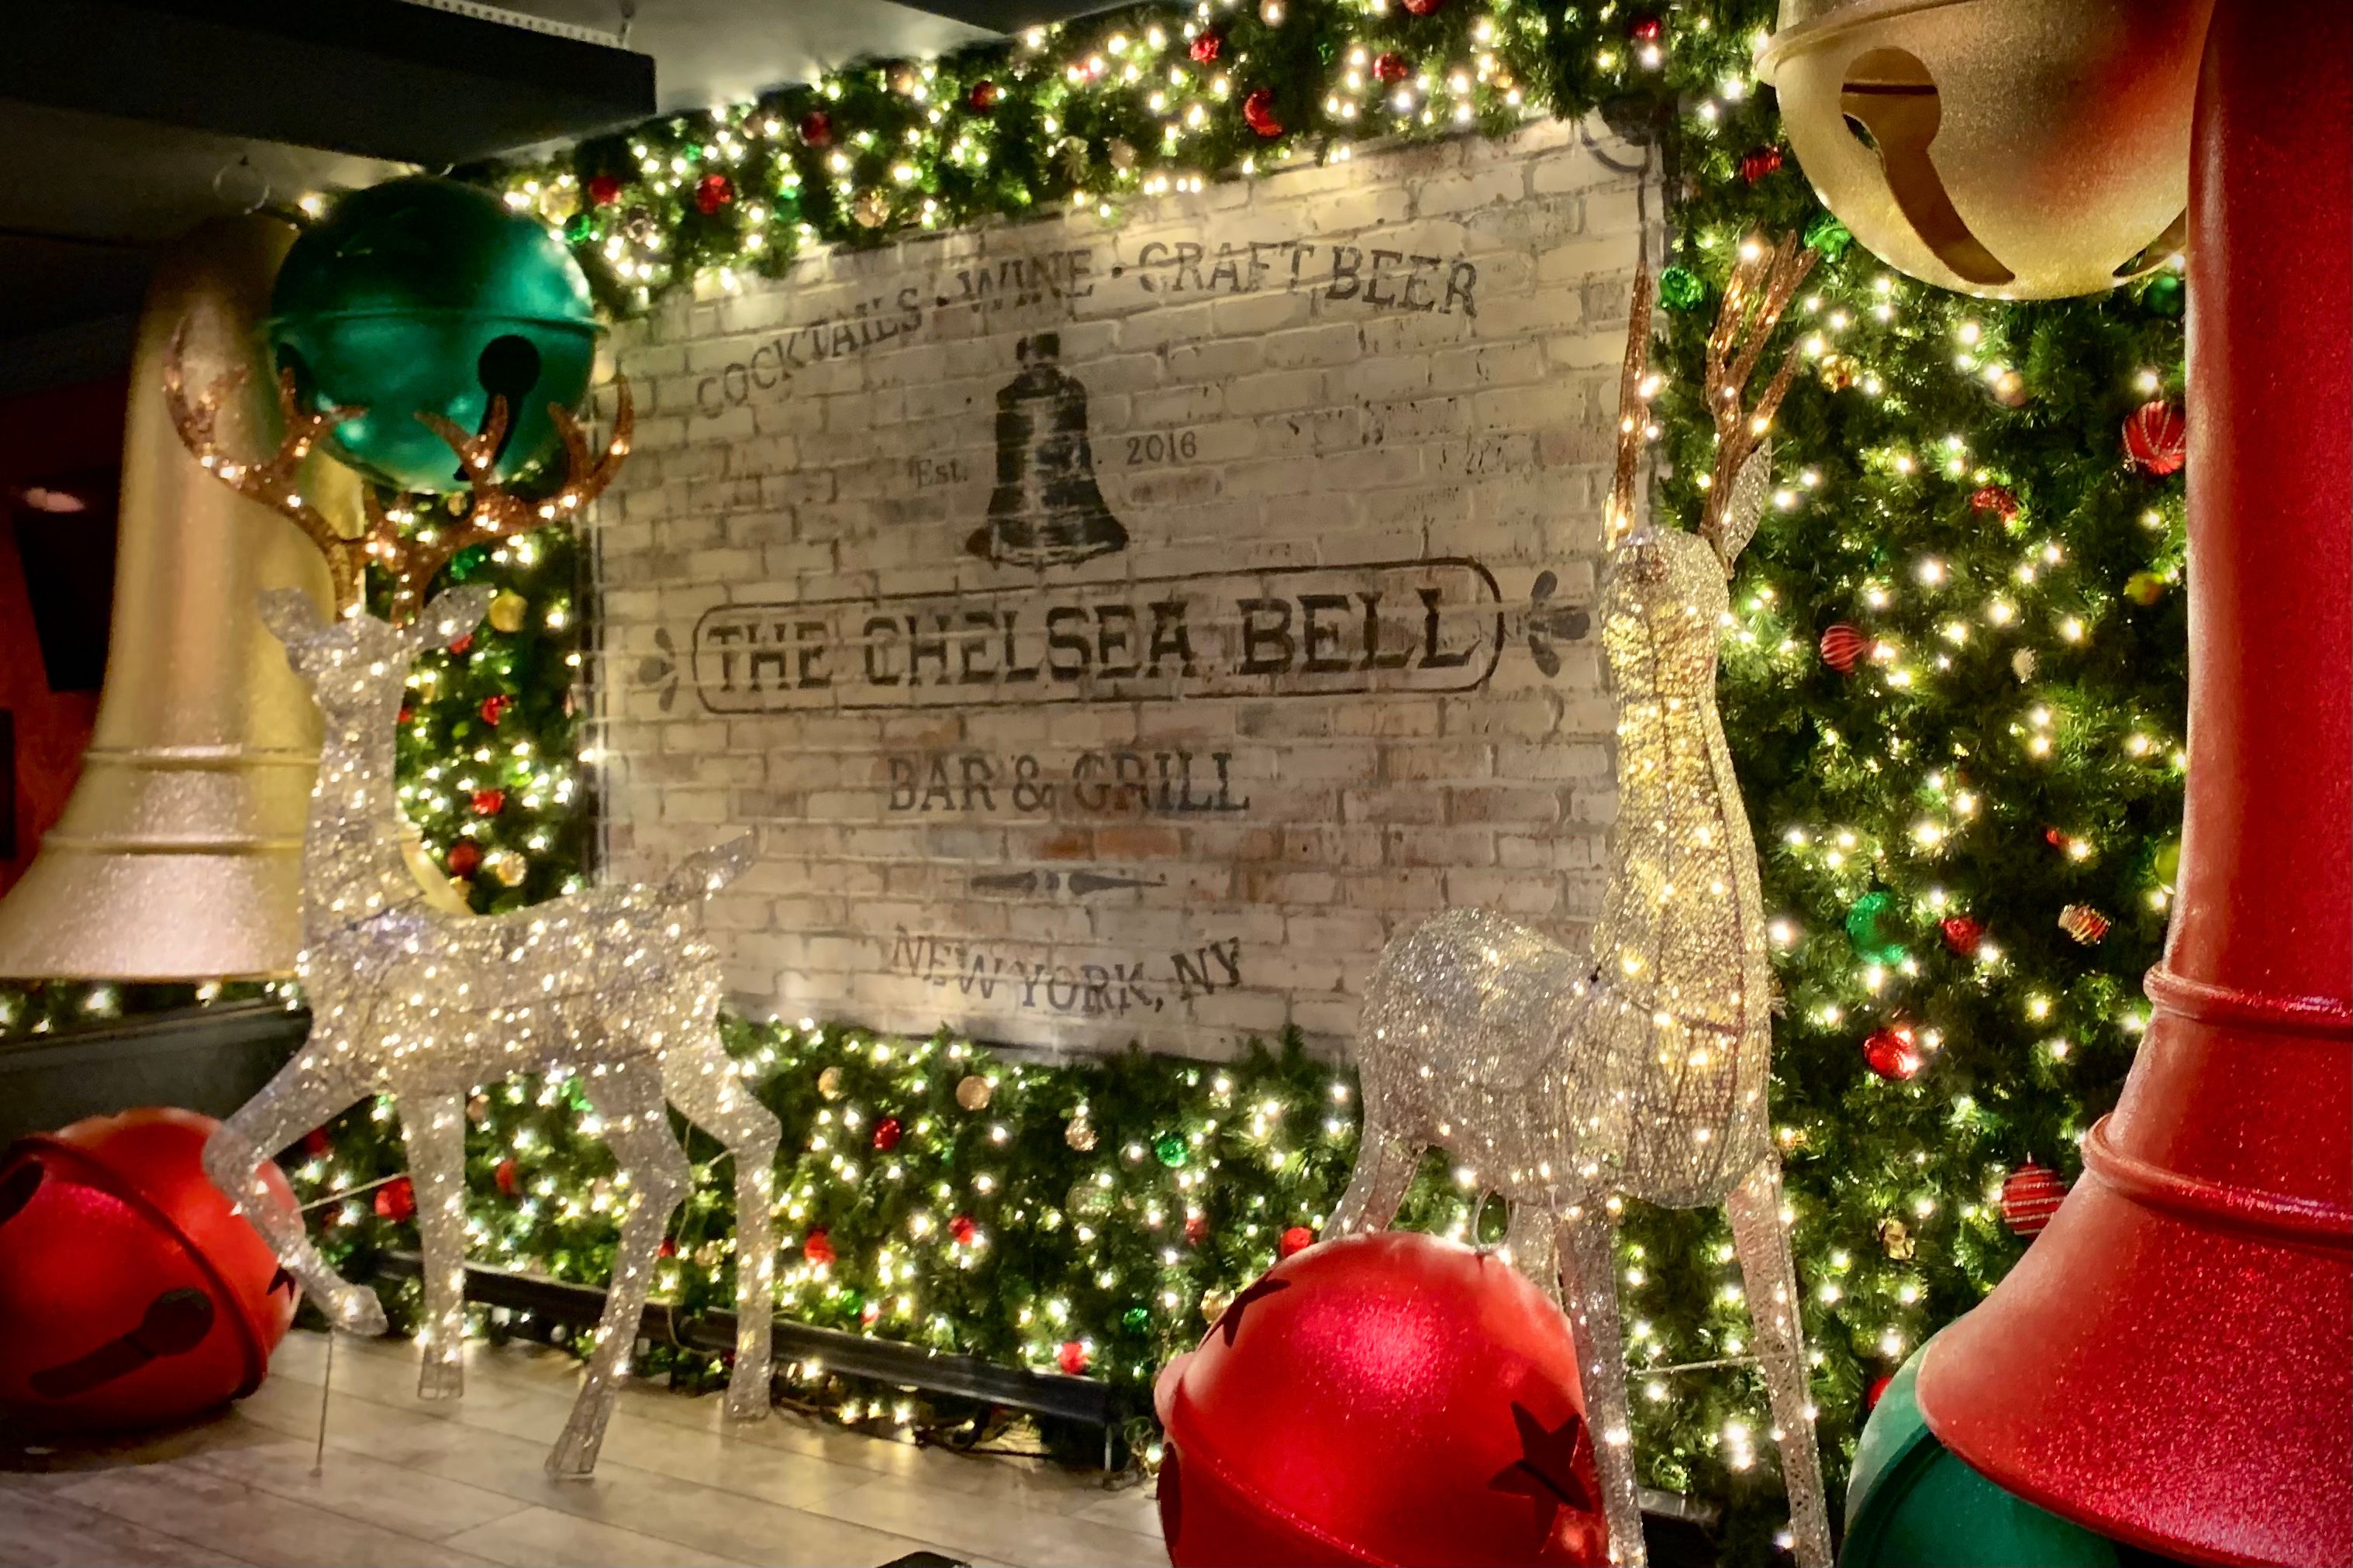 The Chelsea Bell NYC stage area decorated for Christmas